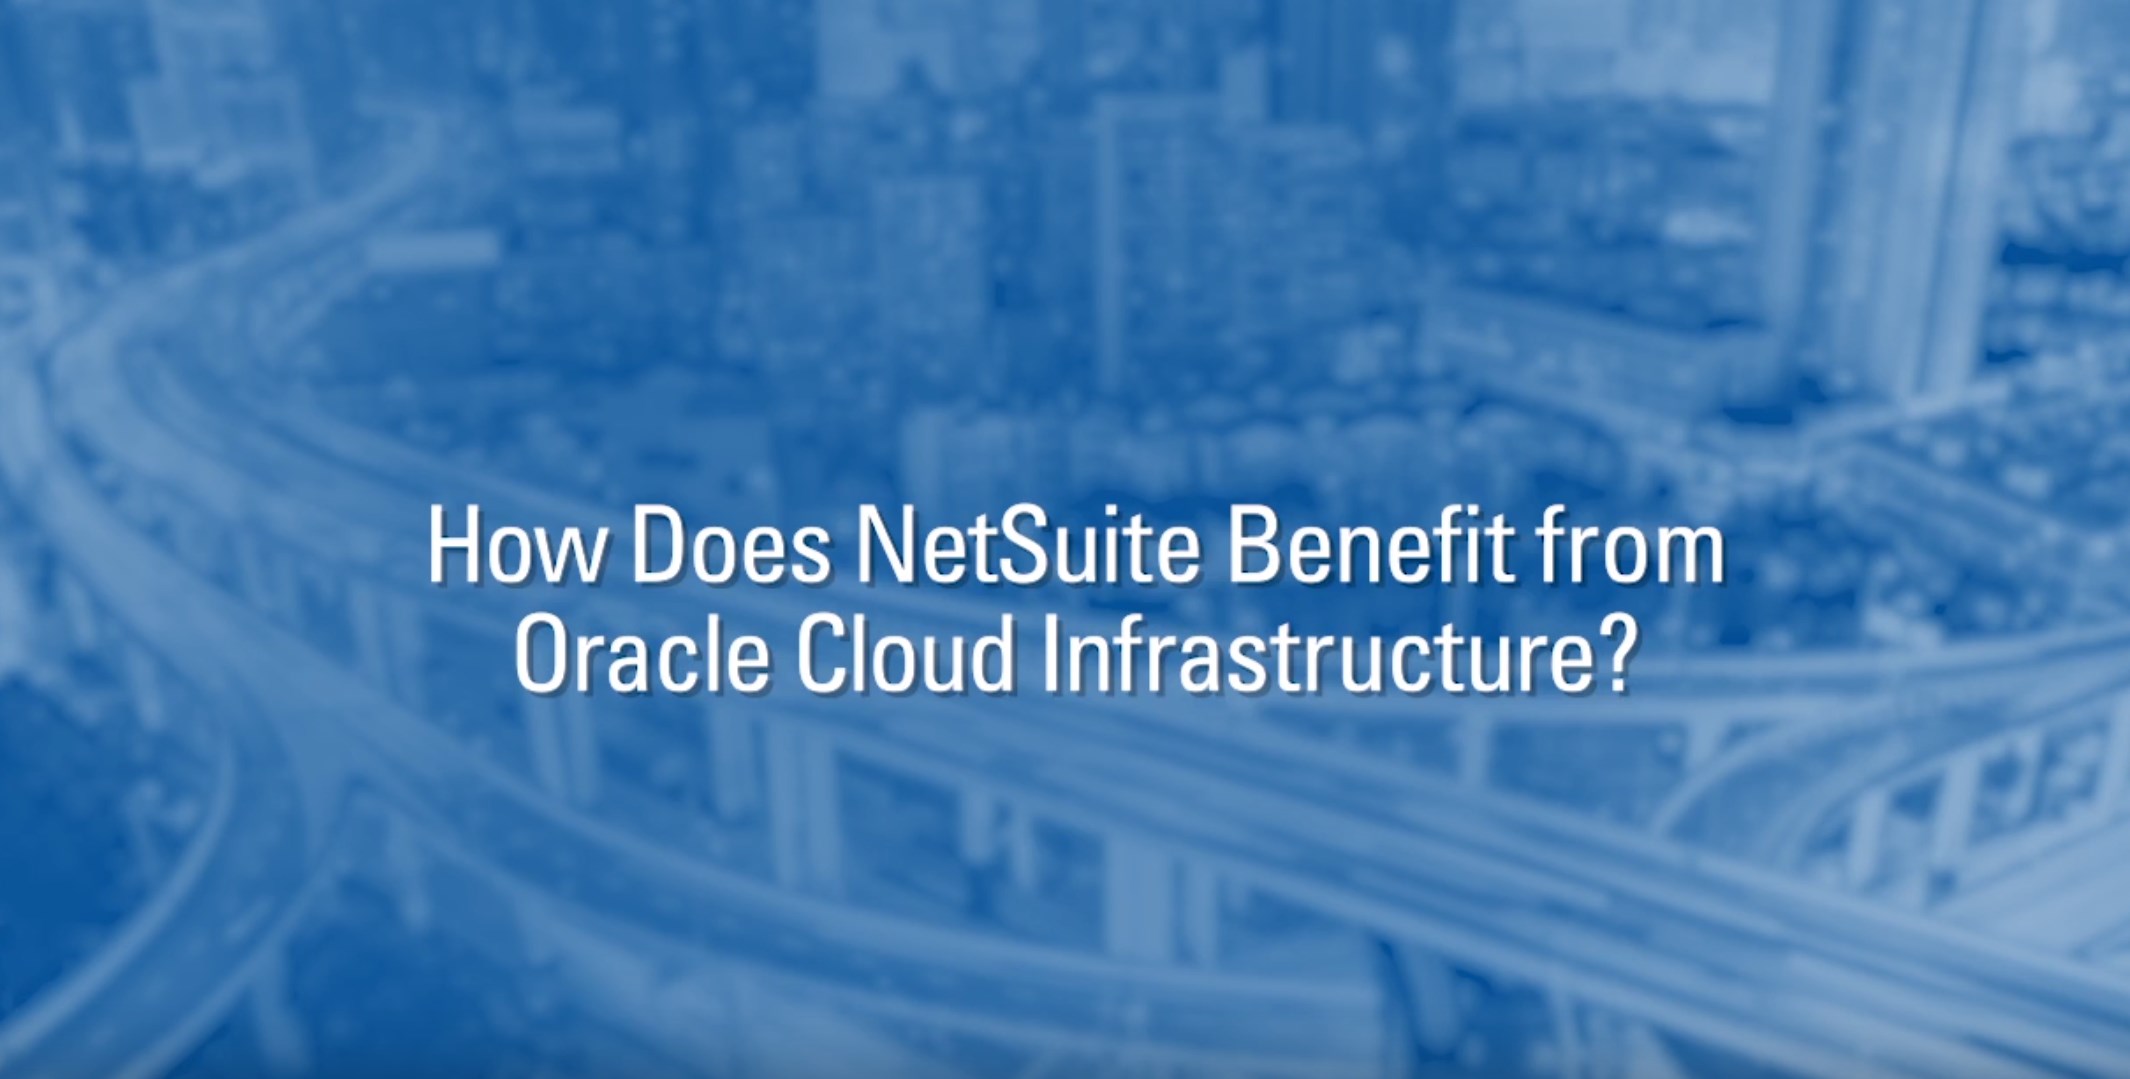 ns-oracle-cloud-infrastructure-impact